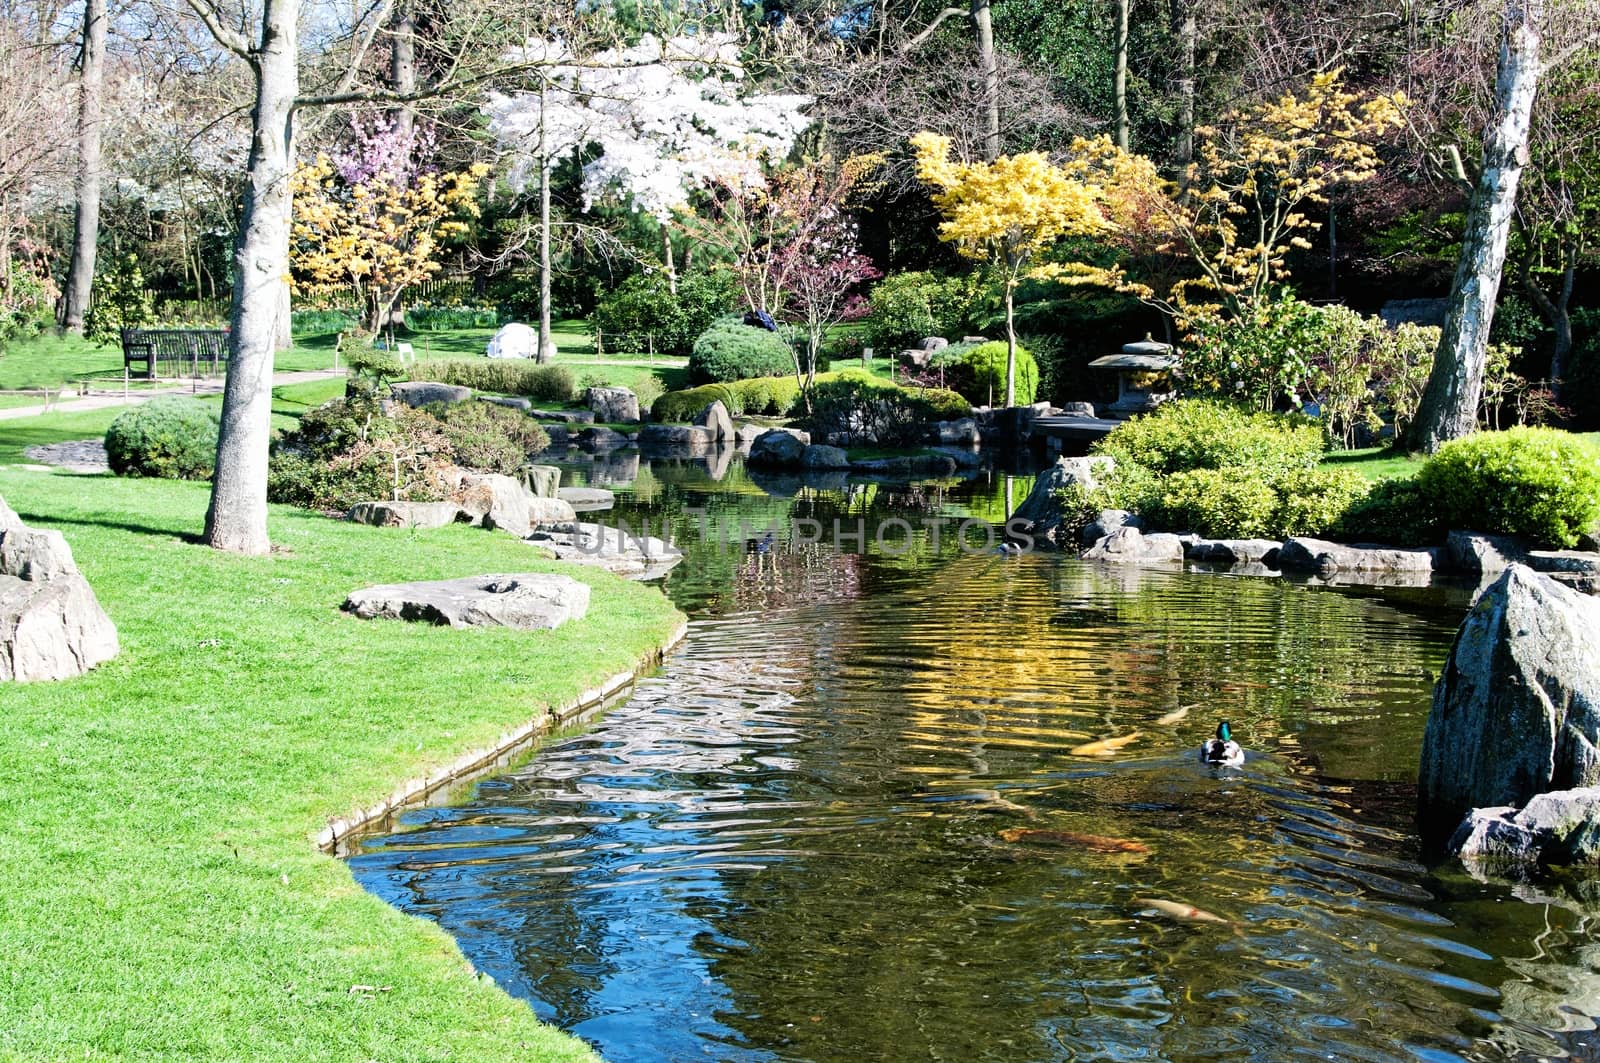 Beautiful pond with ducks in the park